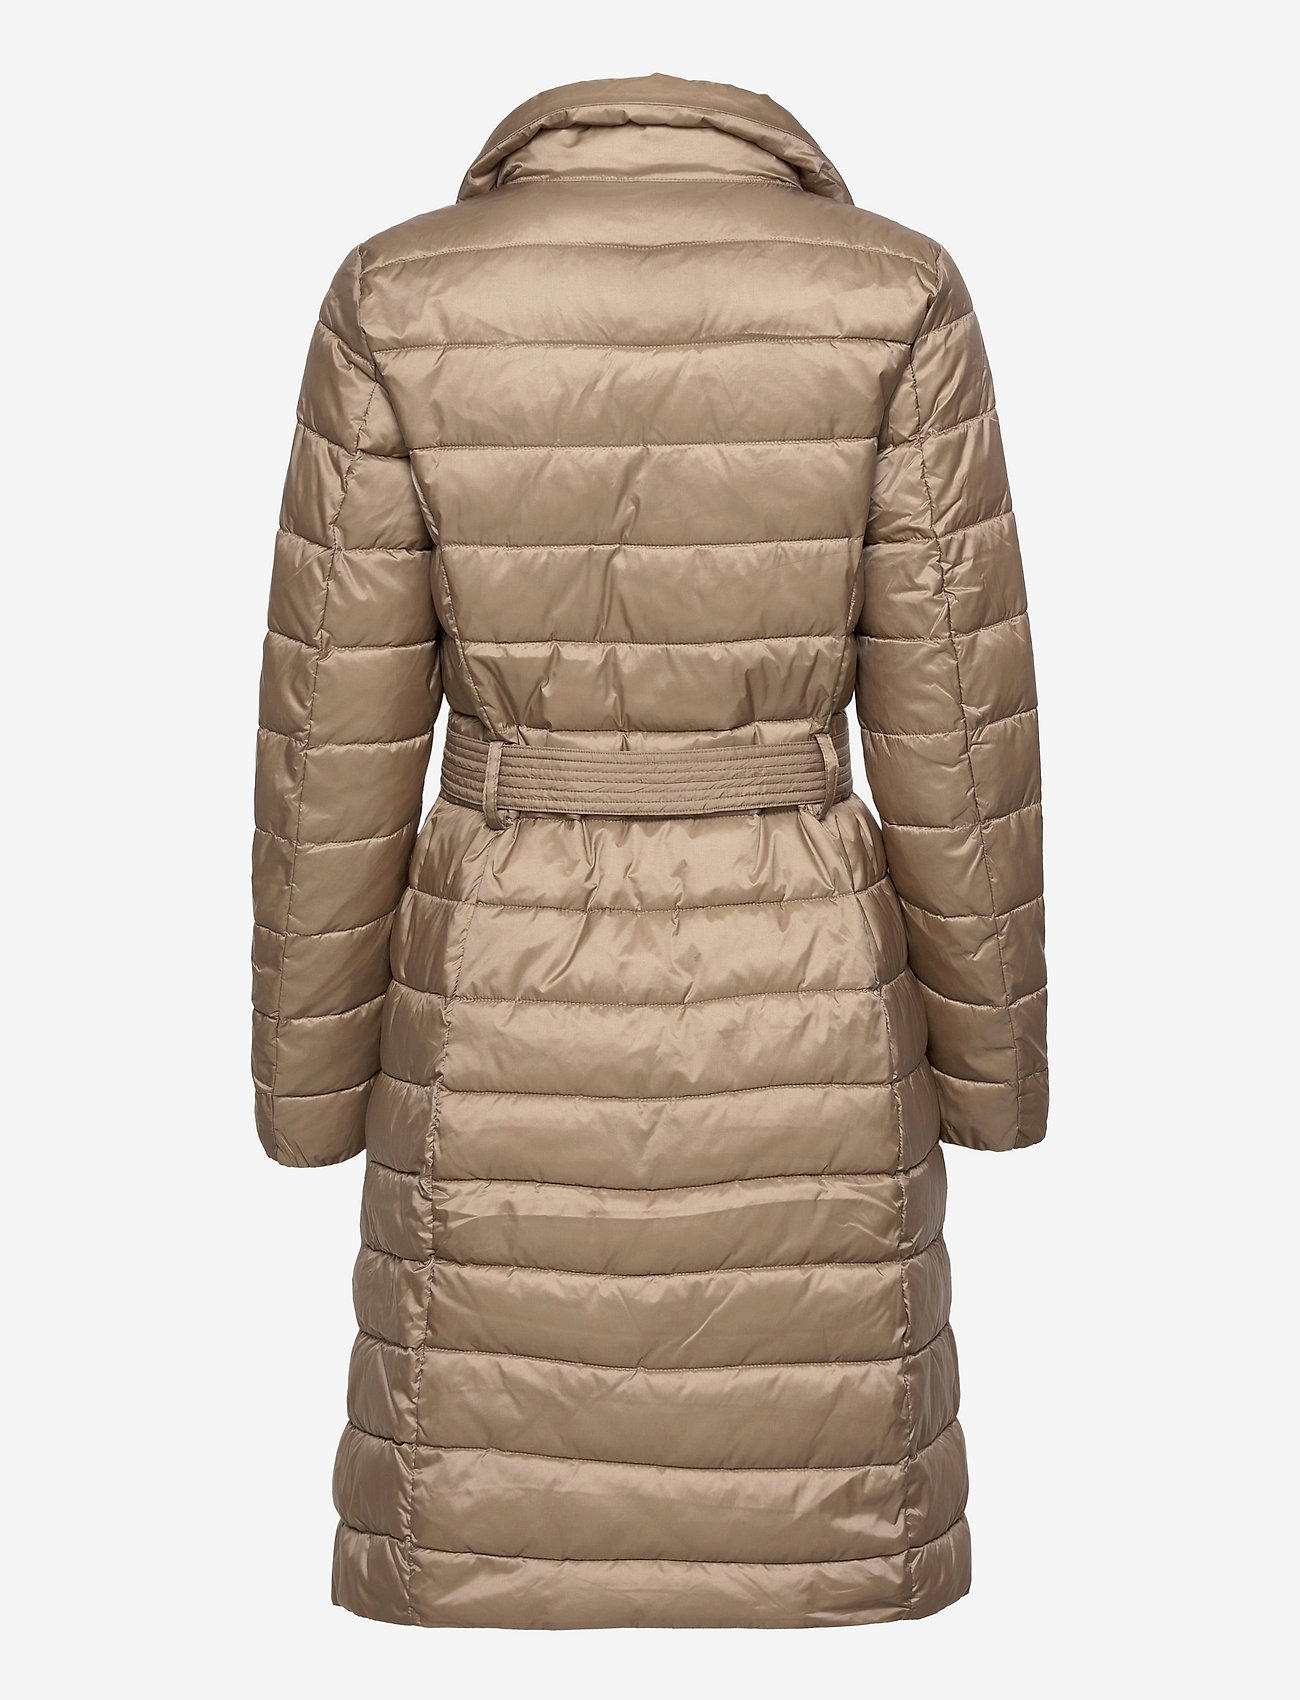 esprit puffer coat with down and feathers